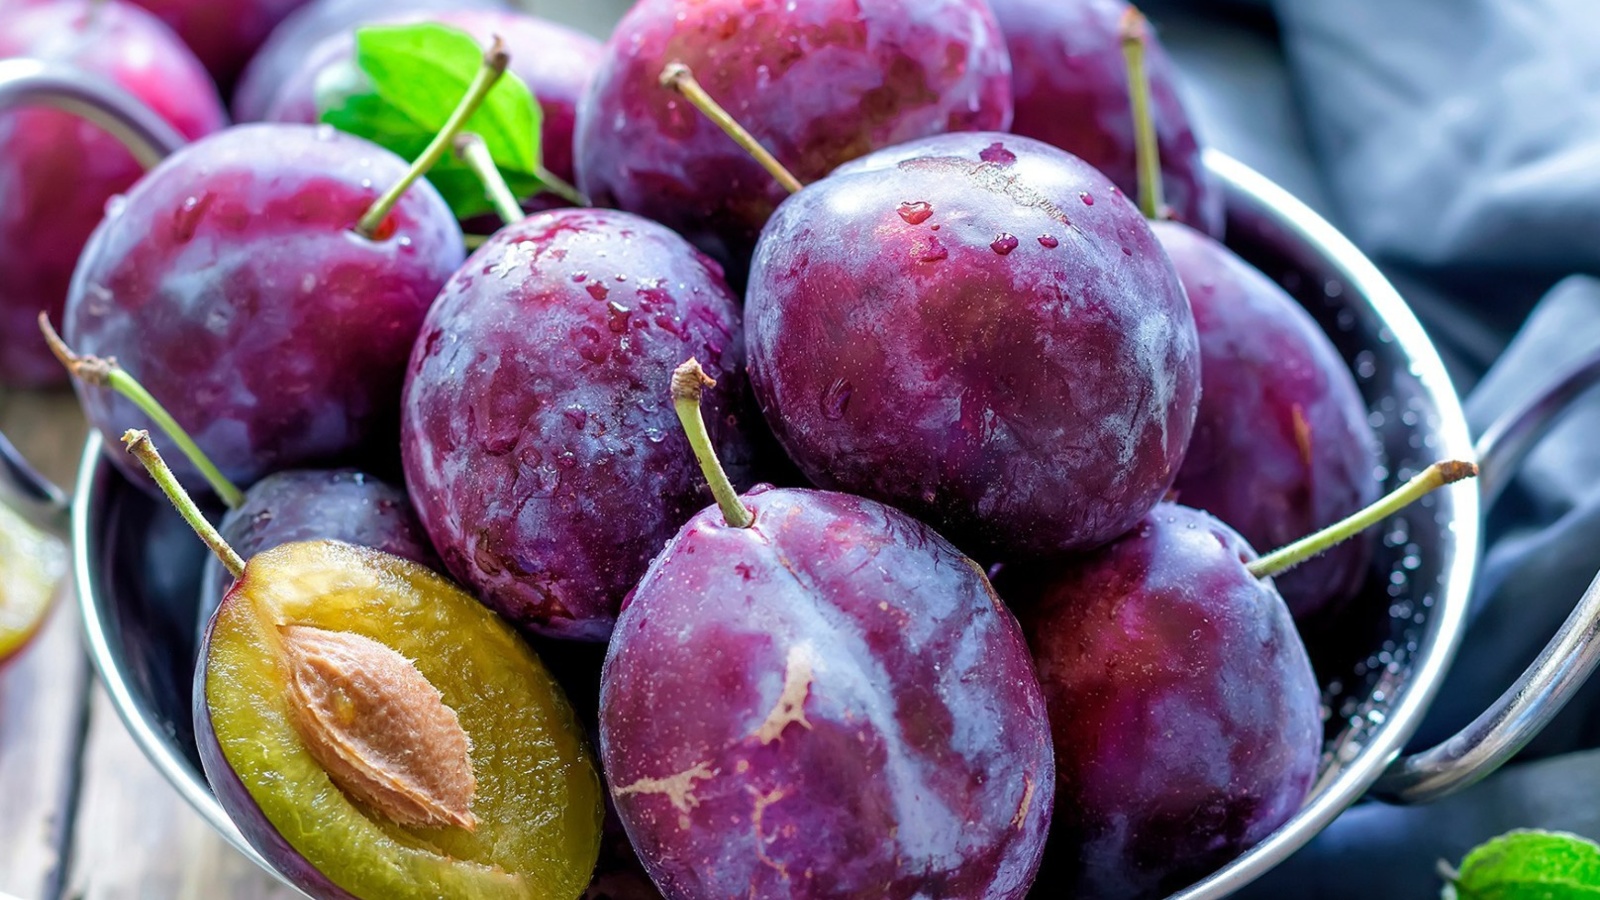 Plums with Vitamins wallpaper 1600x900